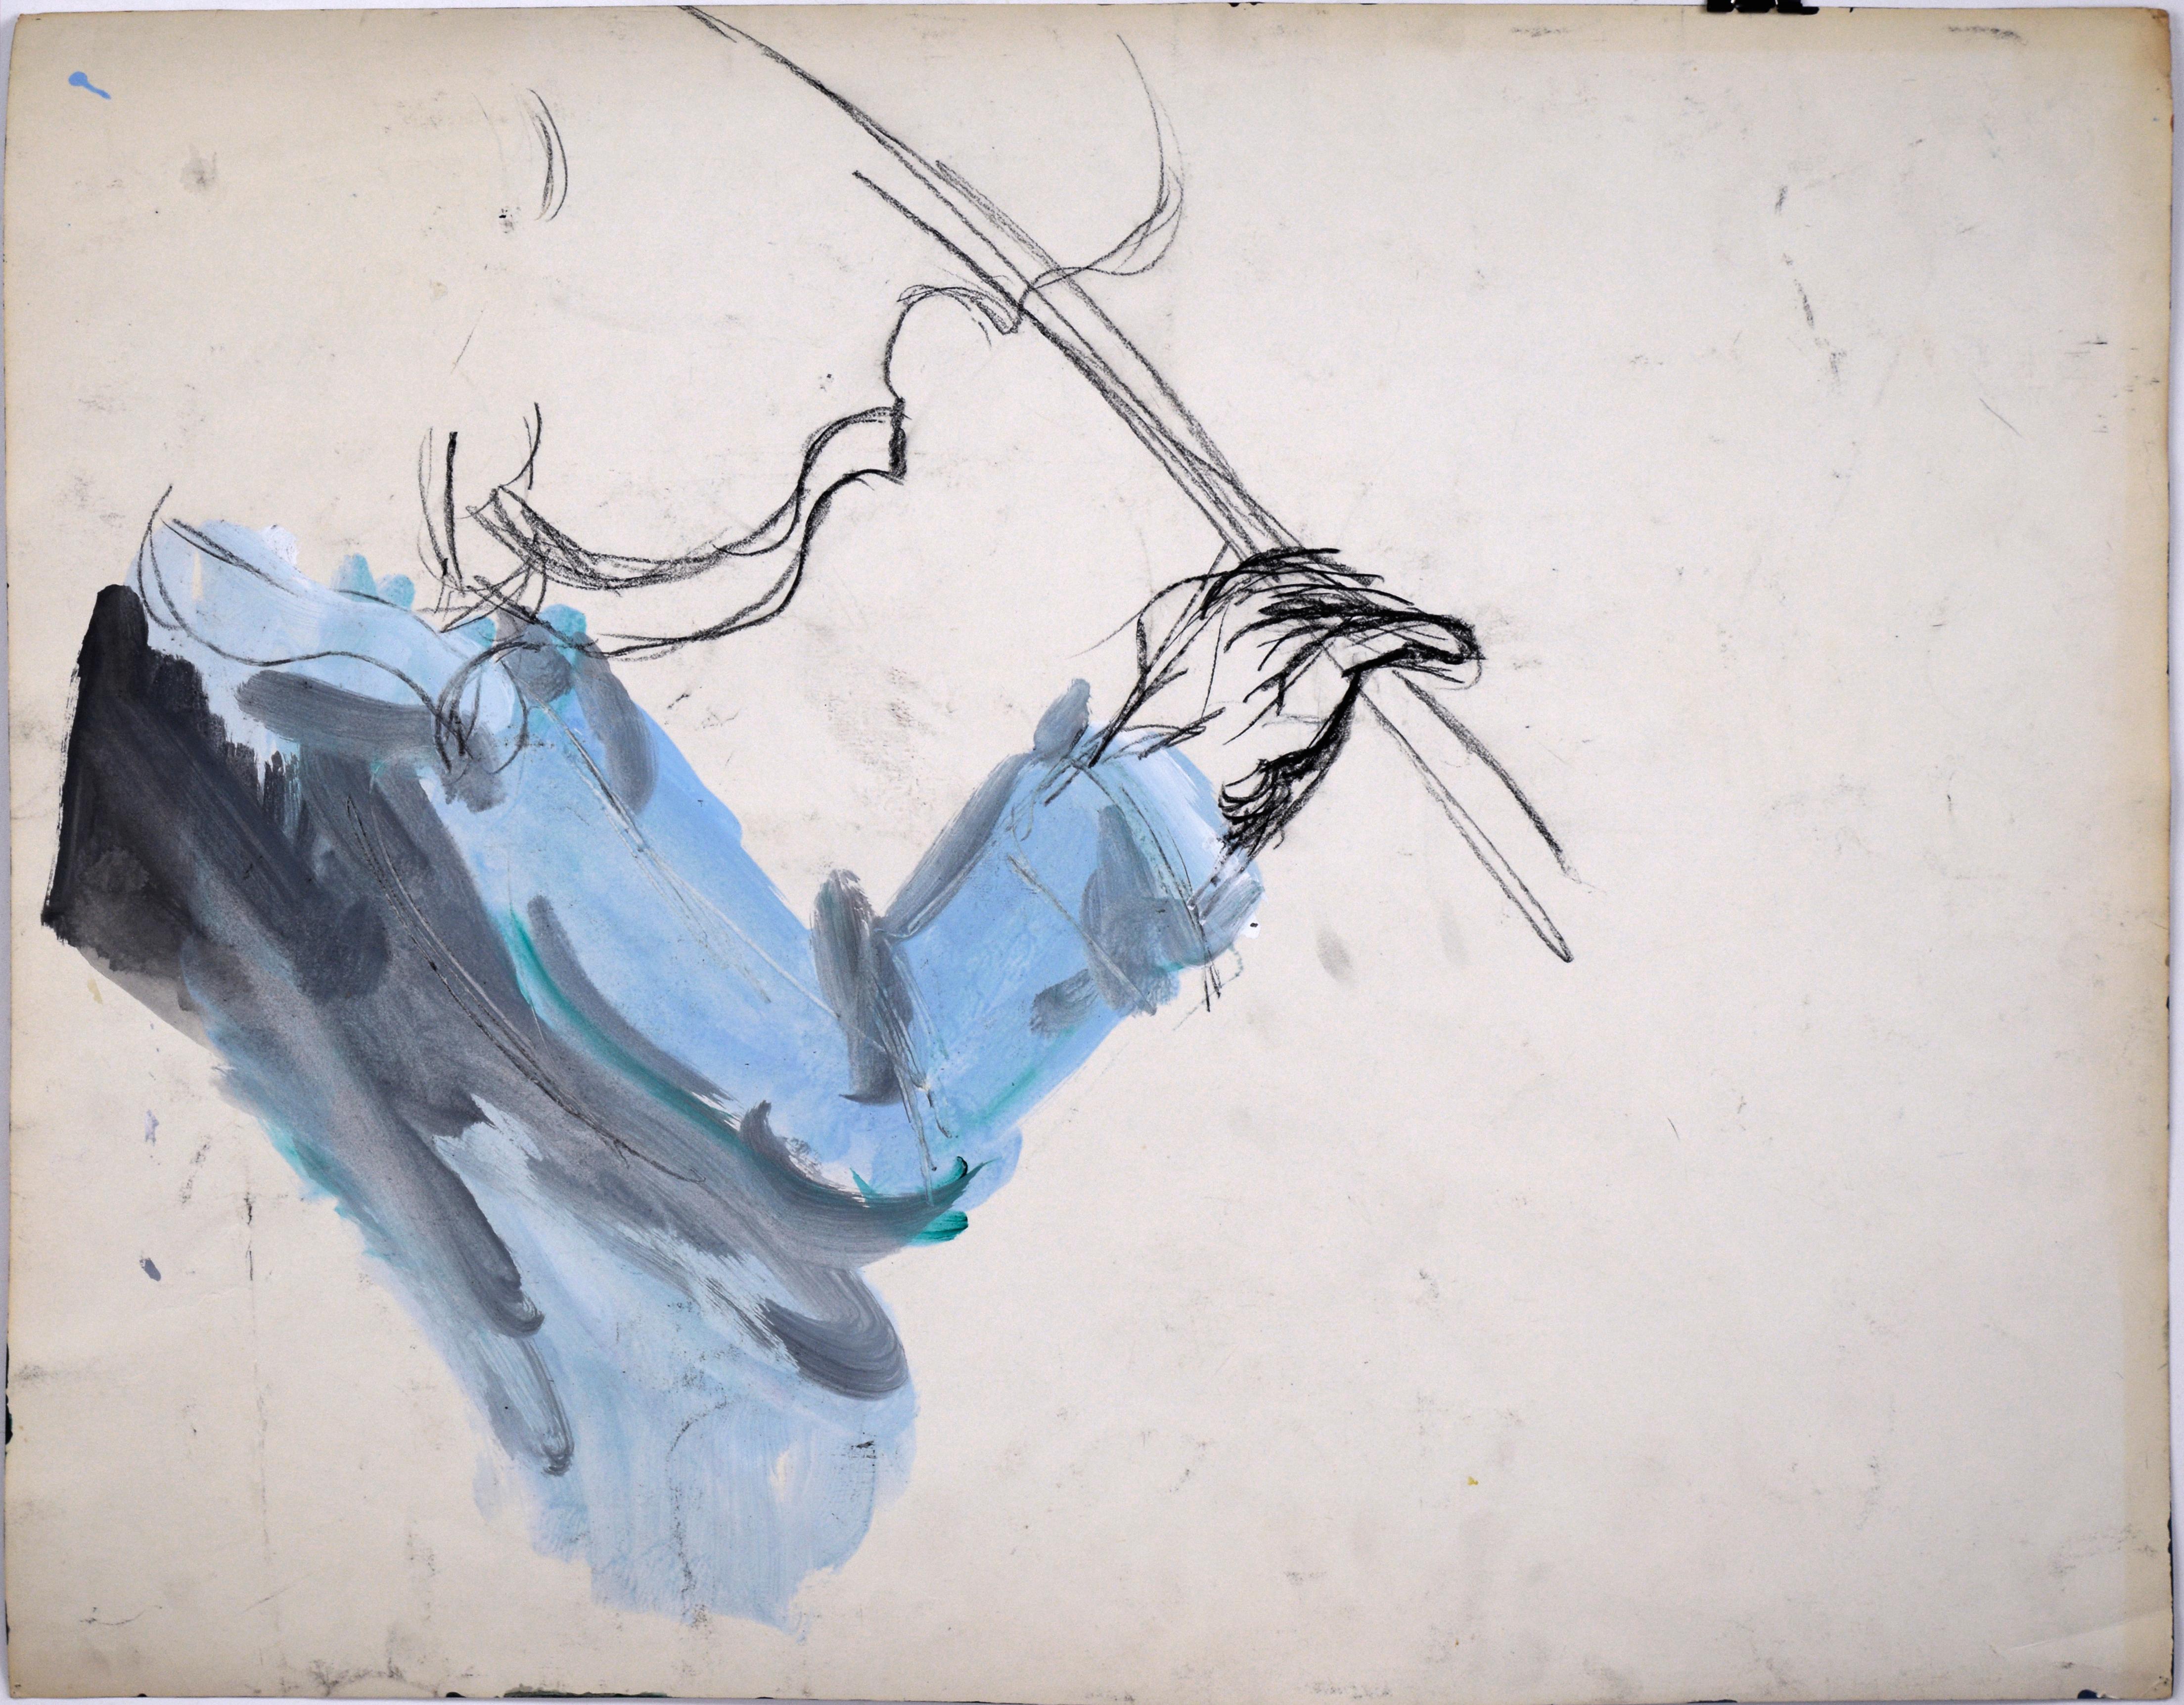 Violin Serenade - Blue Grass in the Nude Acrylic Abstract Expressionist on Paper - Painting by Katherine Kallick